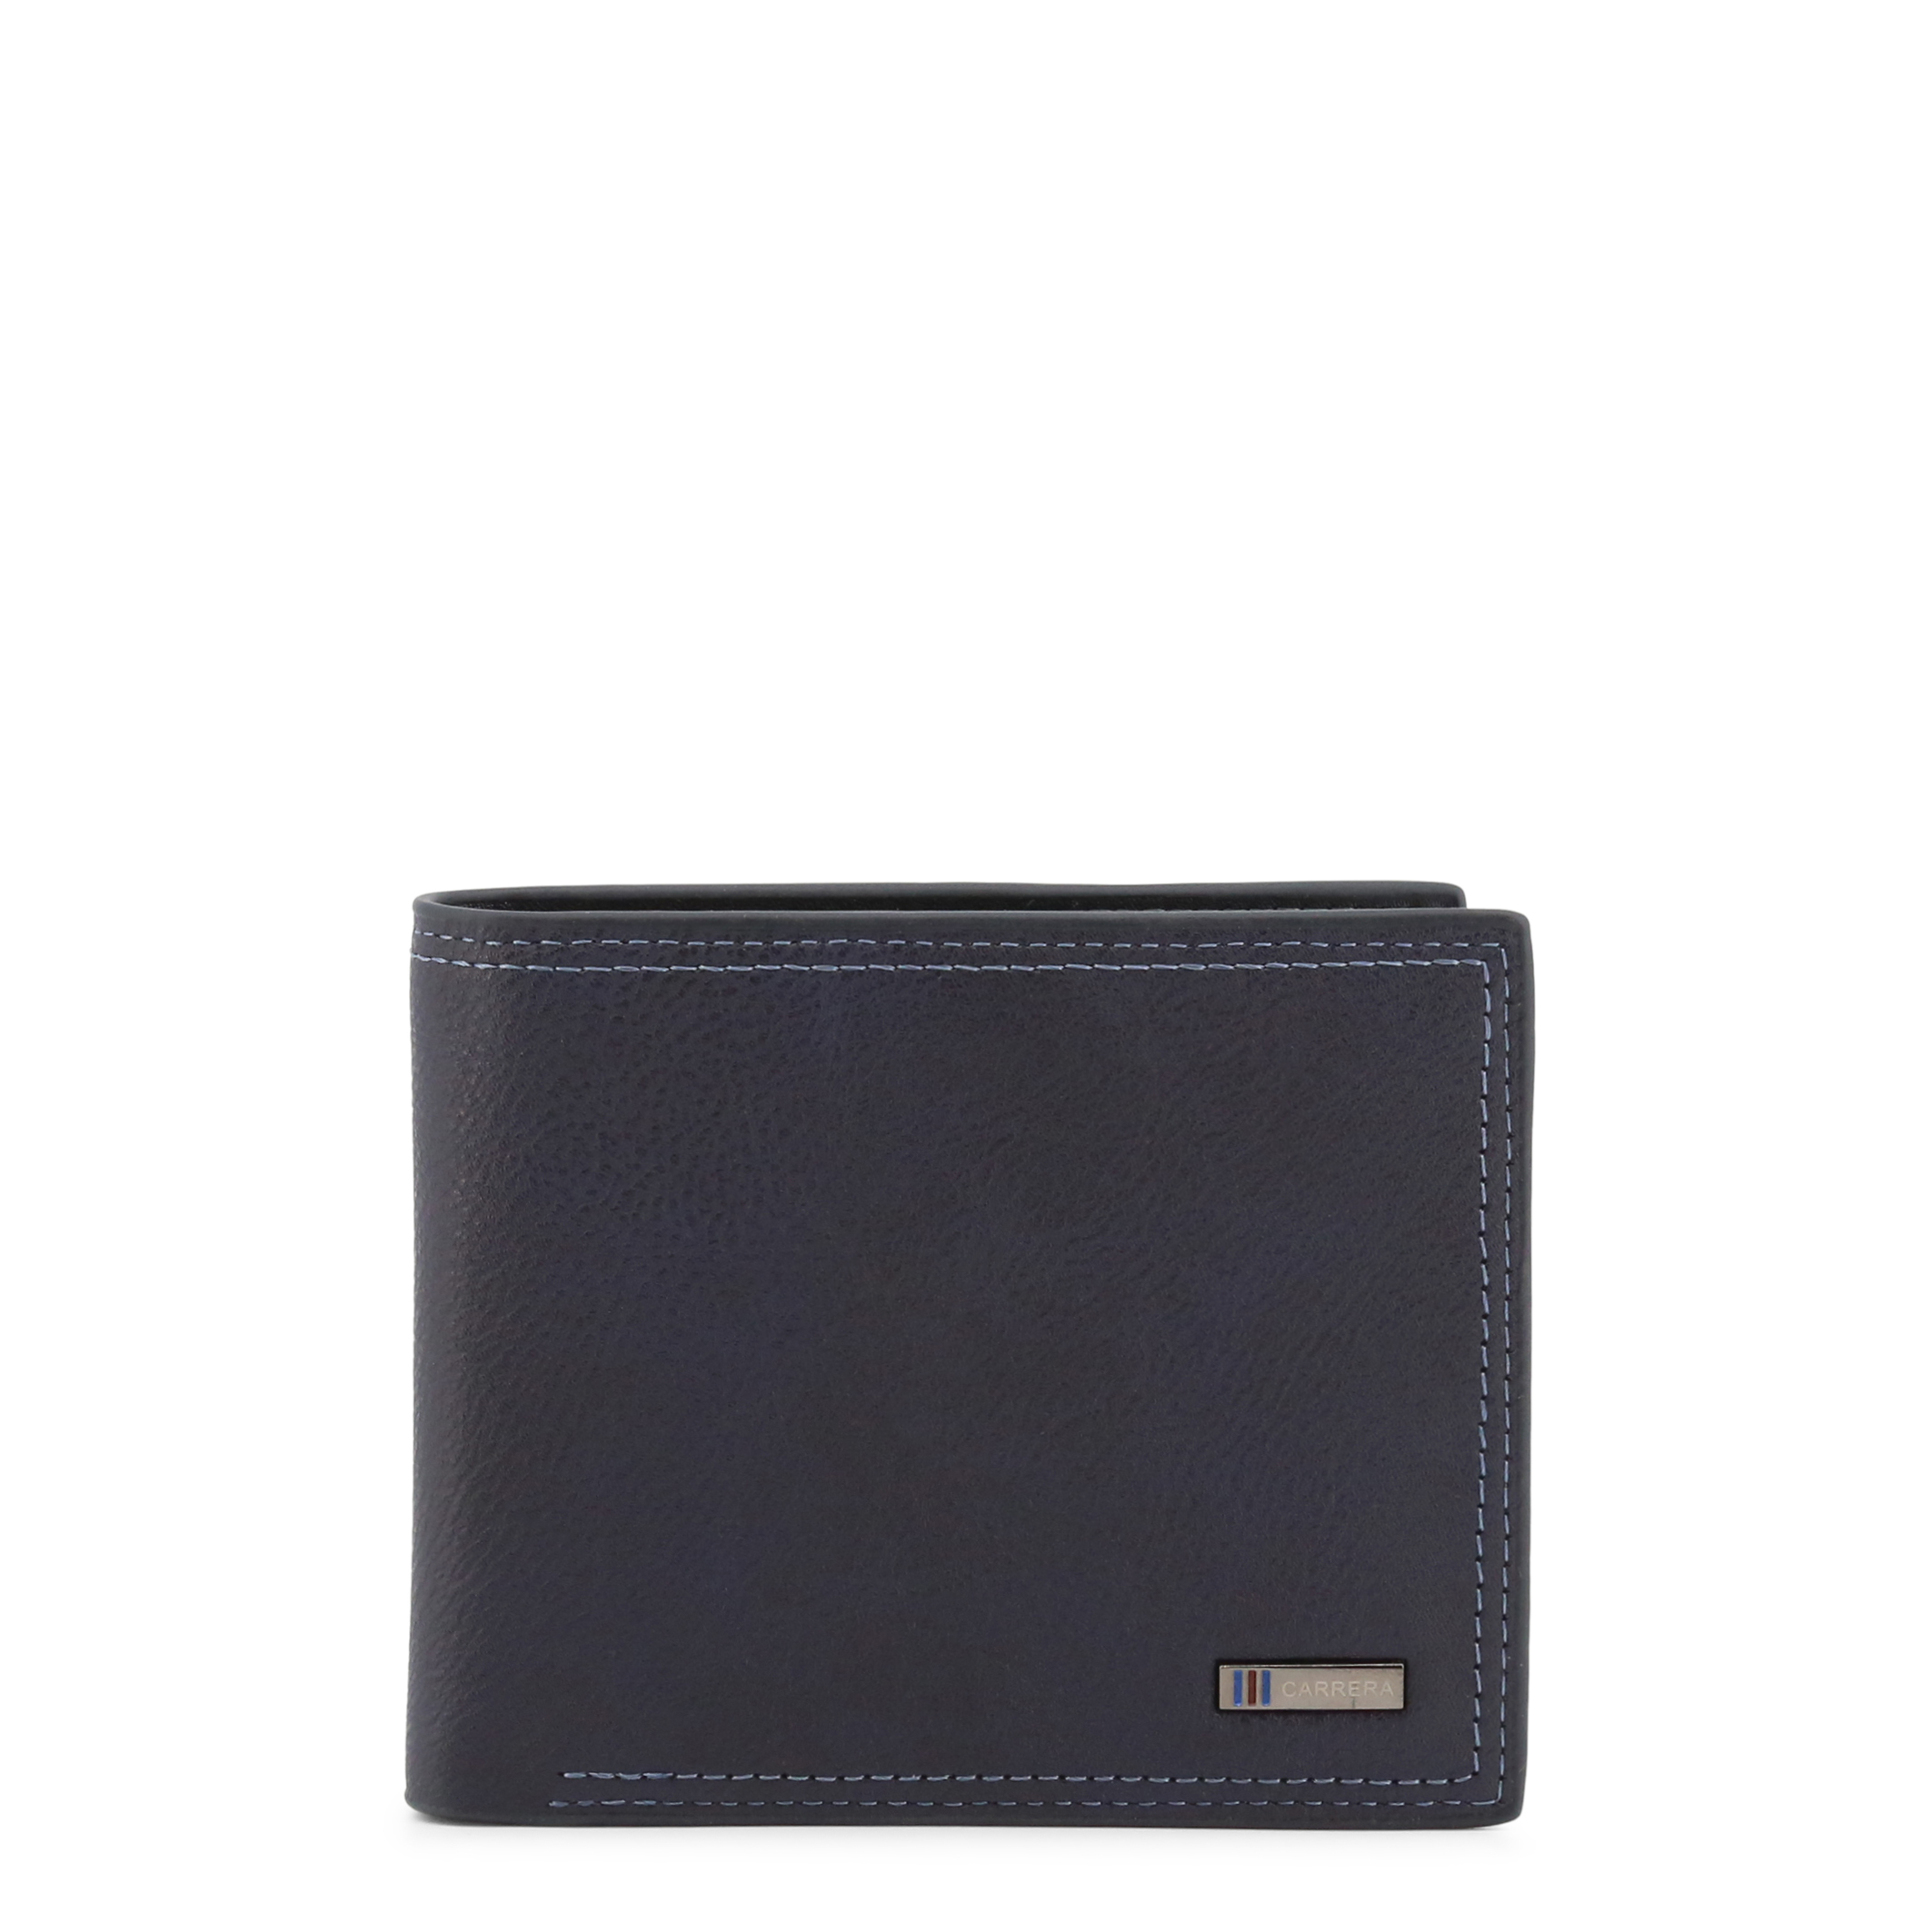 Carrera Jeans Blue Wallets for Men - HOLD_CB6512